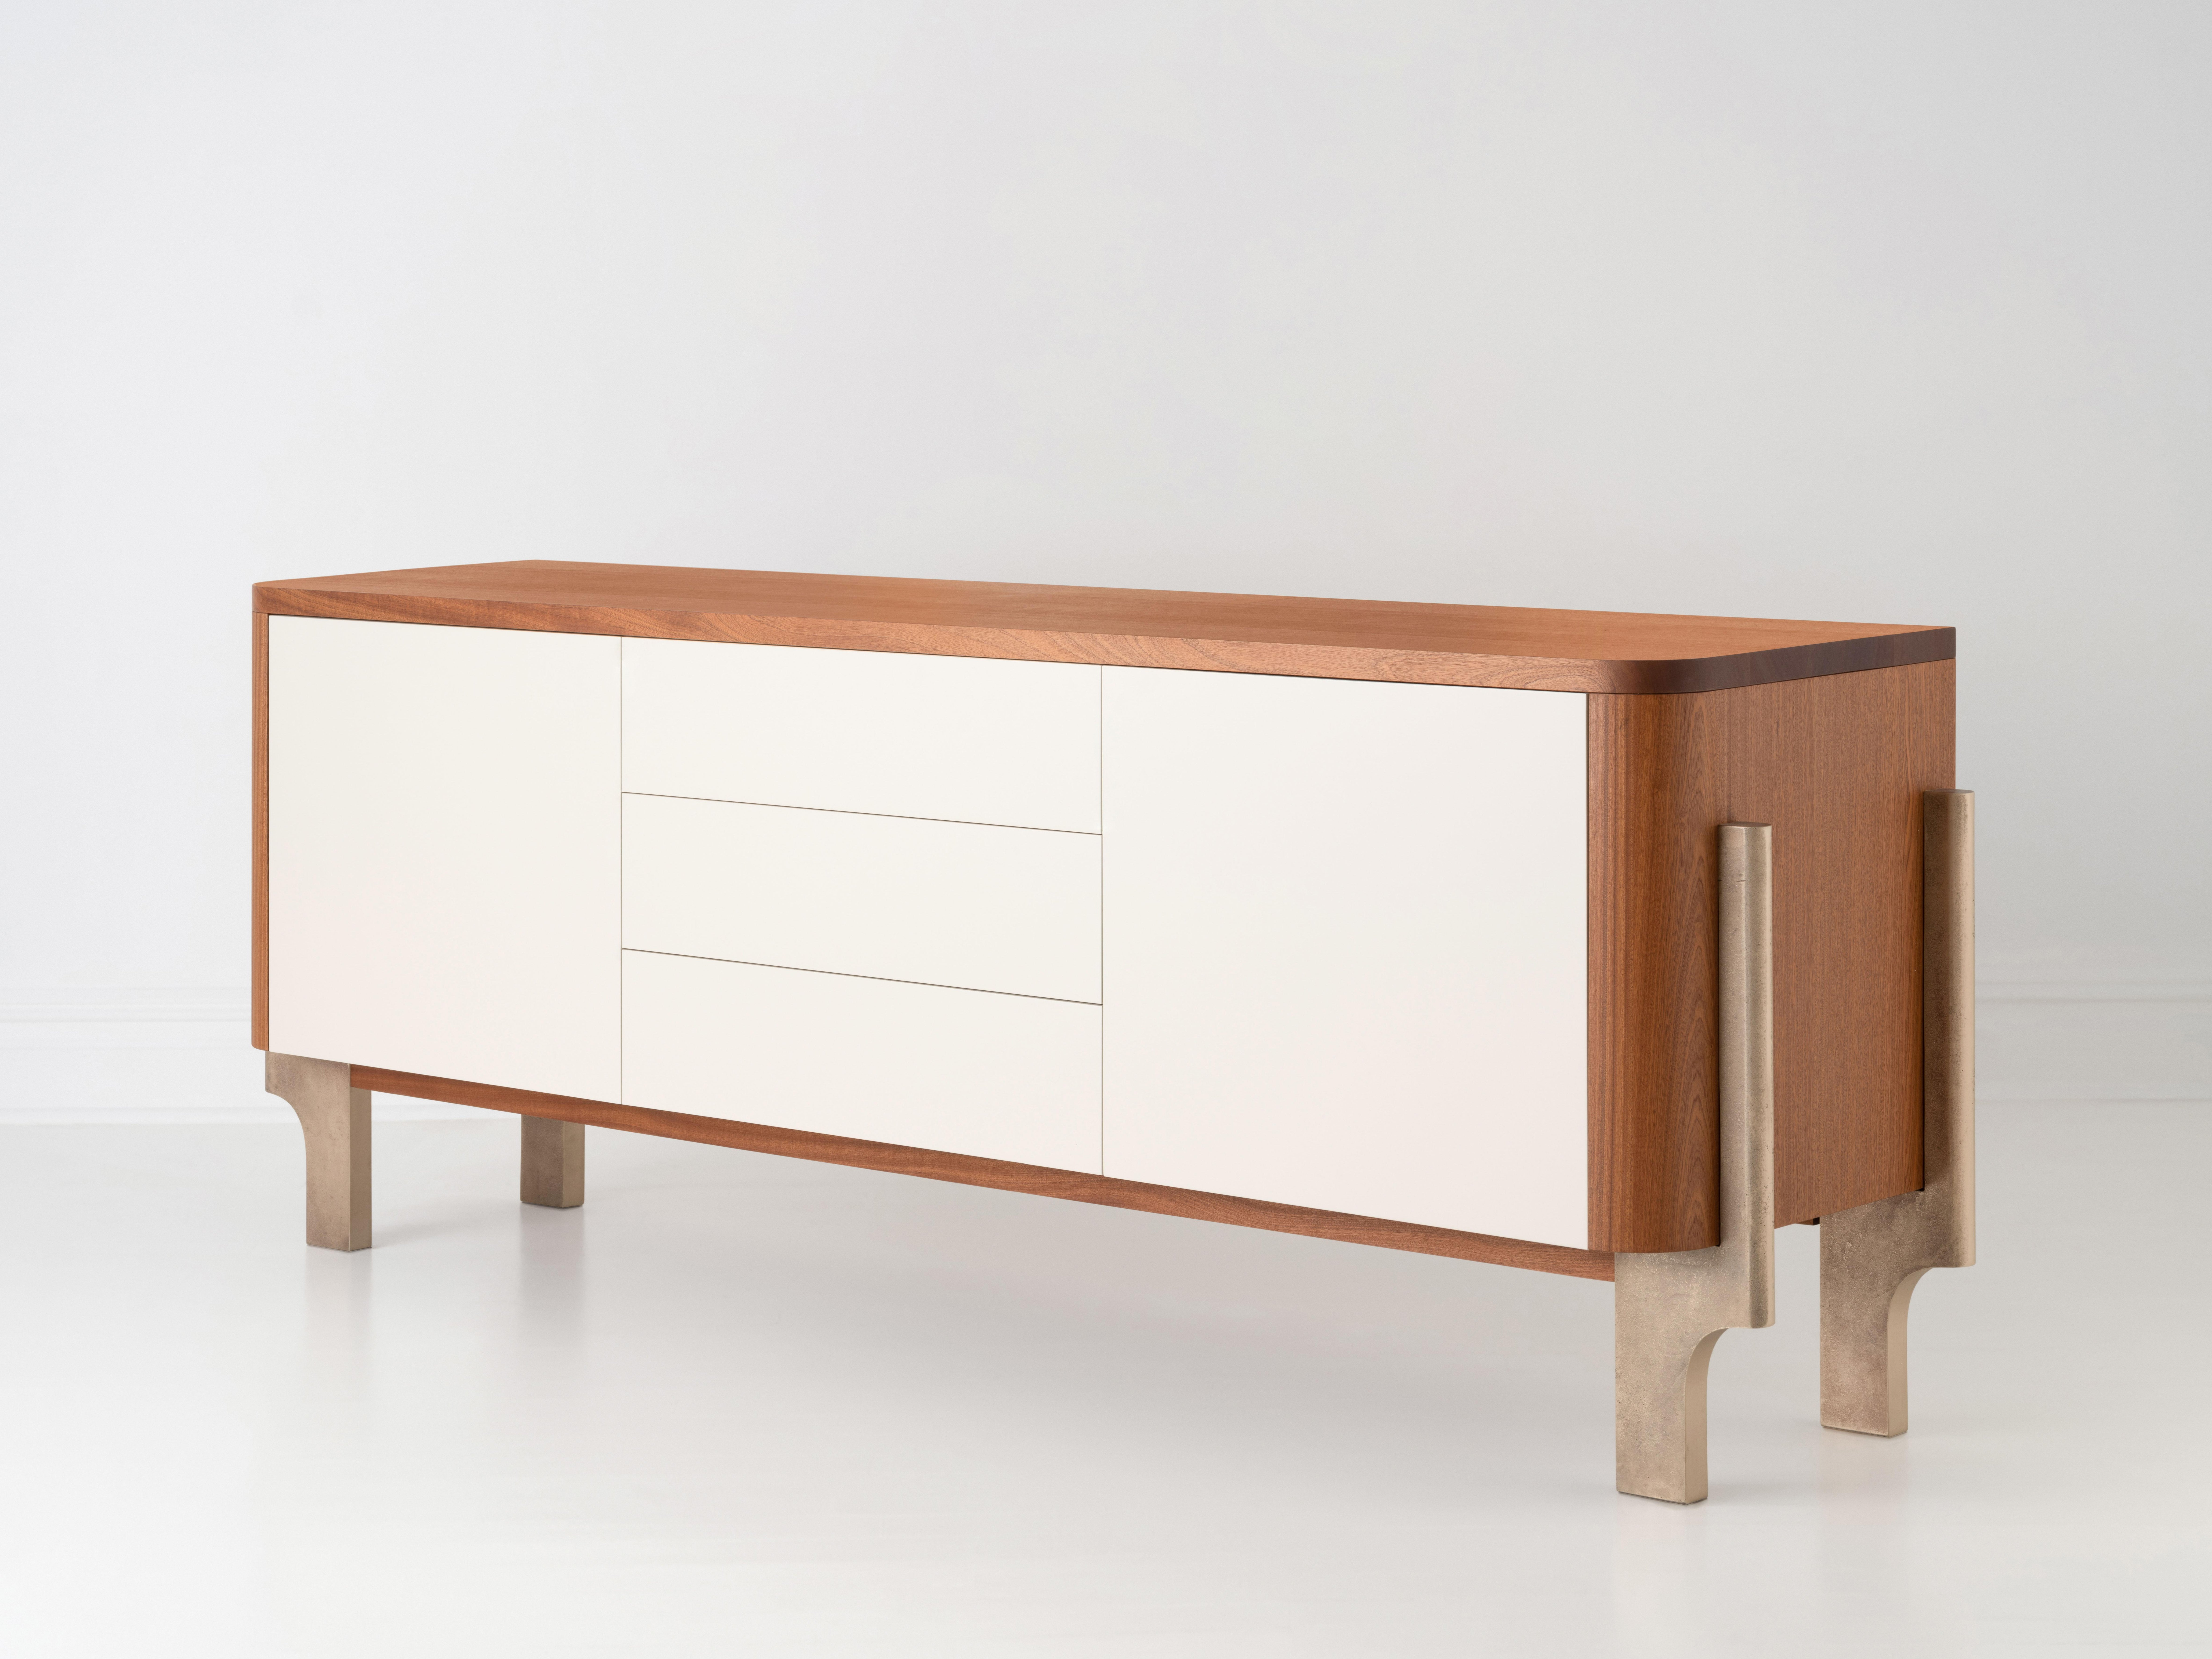 Designed to be noticed and built to last for generations. Our Lorraine Credenza's strong lines and bold structure are borrowed from the architecture of the Brutalist movement. Solid hardwood and cast bronze legs wrap this piece in luxury. Expertly